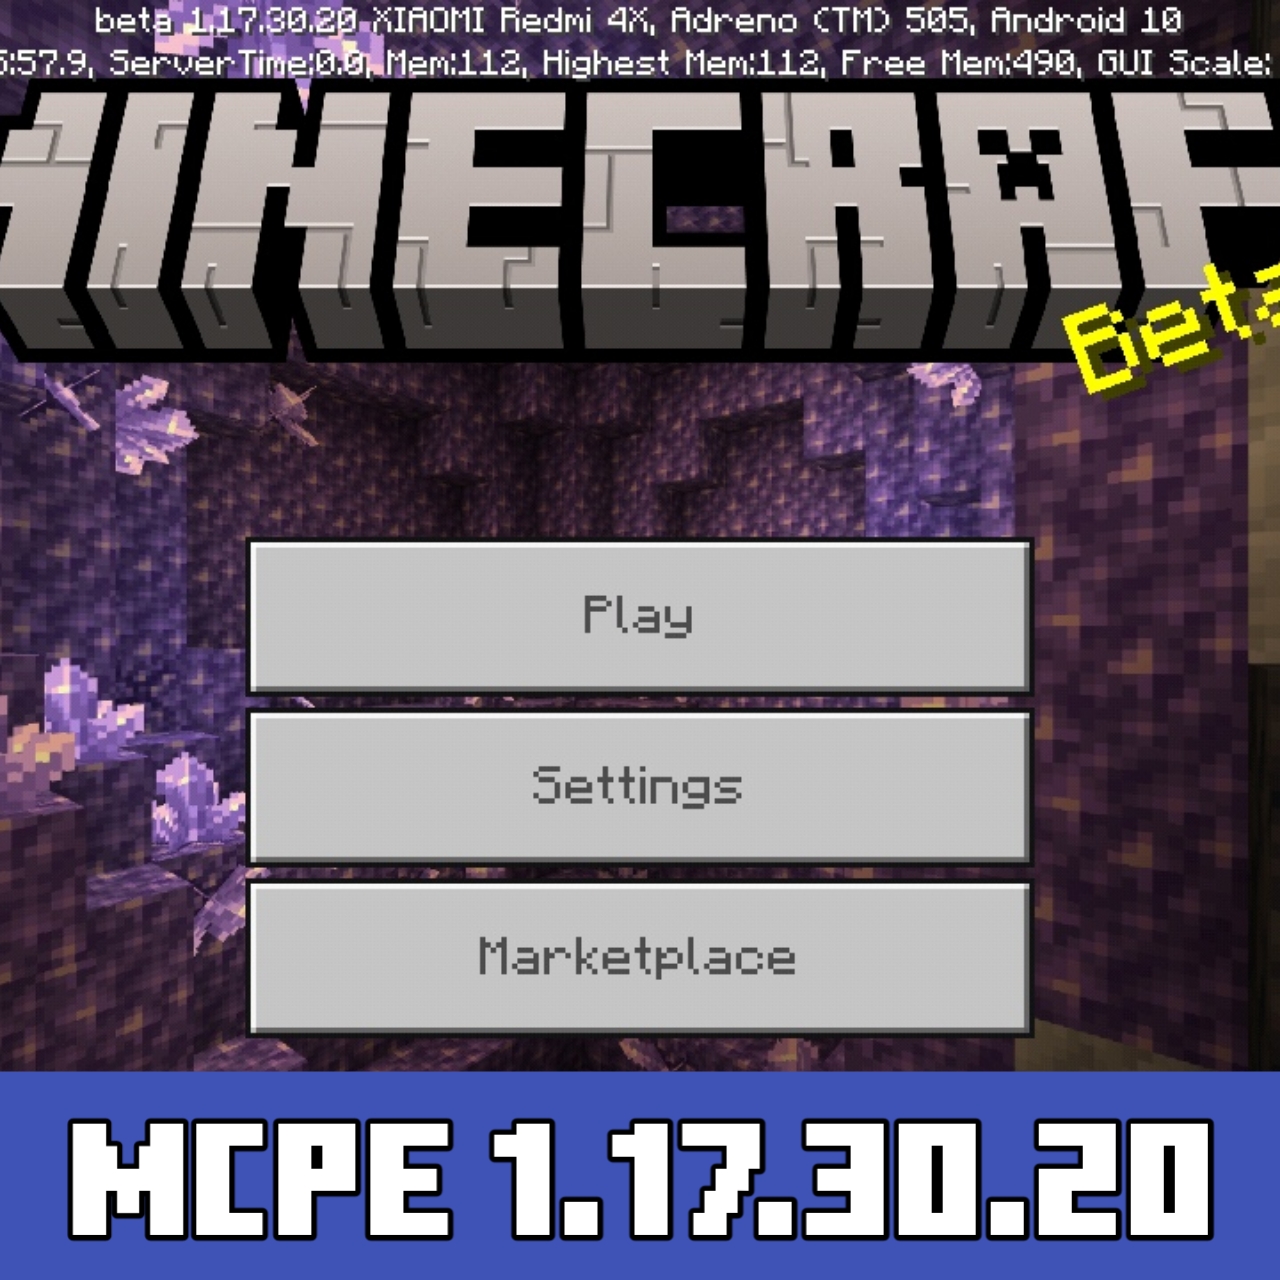 How To Play Minecraft 1.17 Caves And Cliffs Update Snapshot For Free!  (Using TLauncher) 